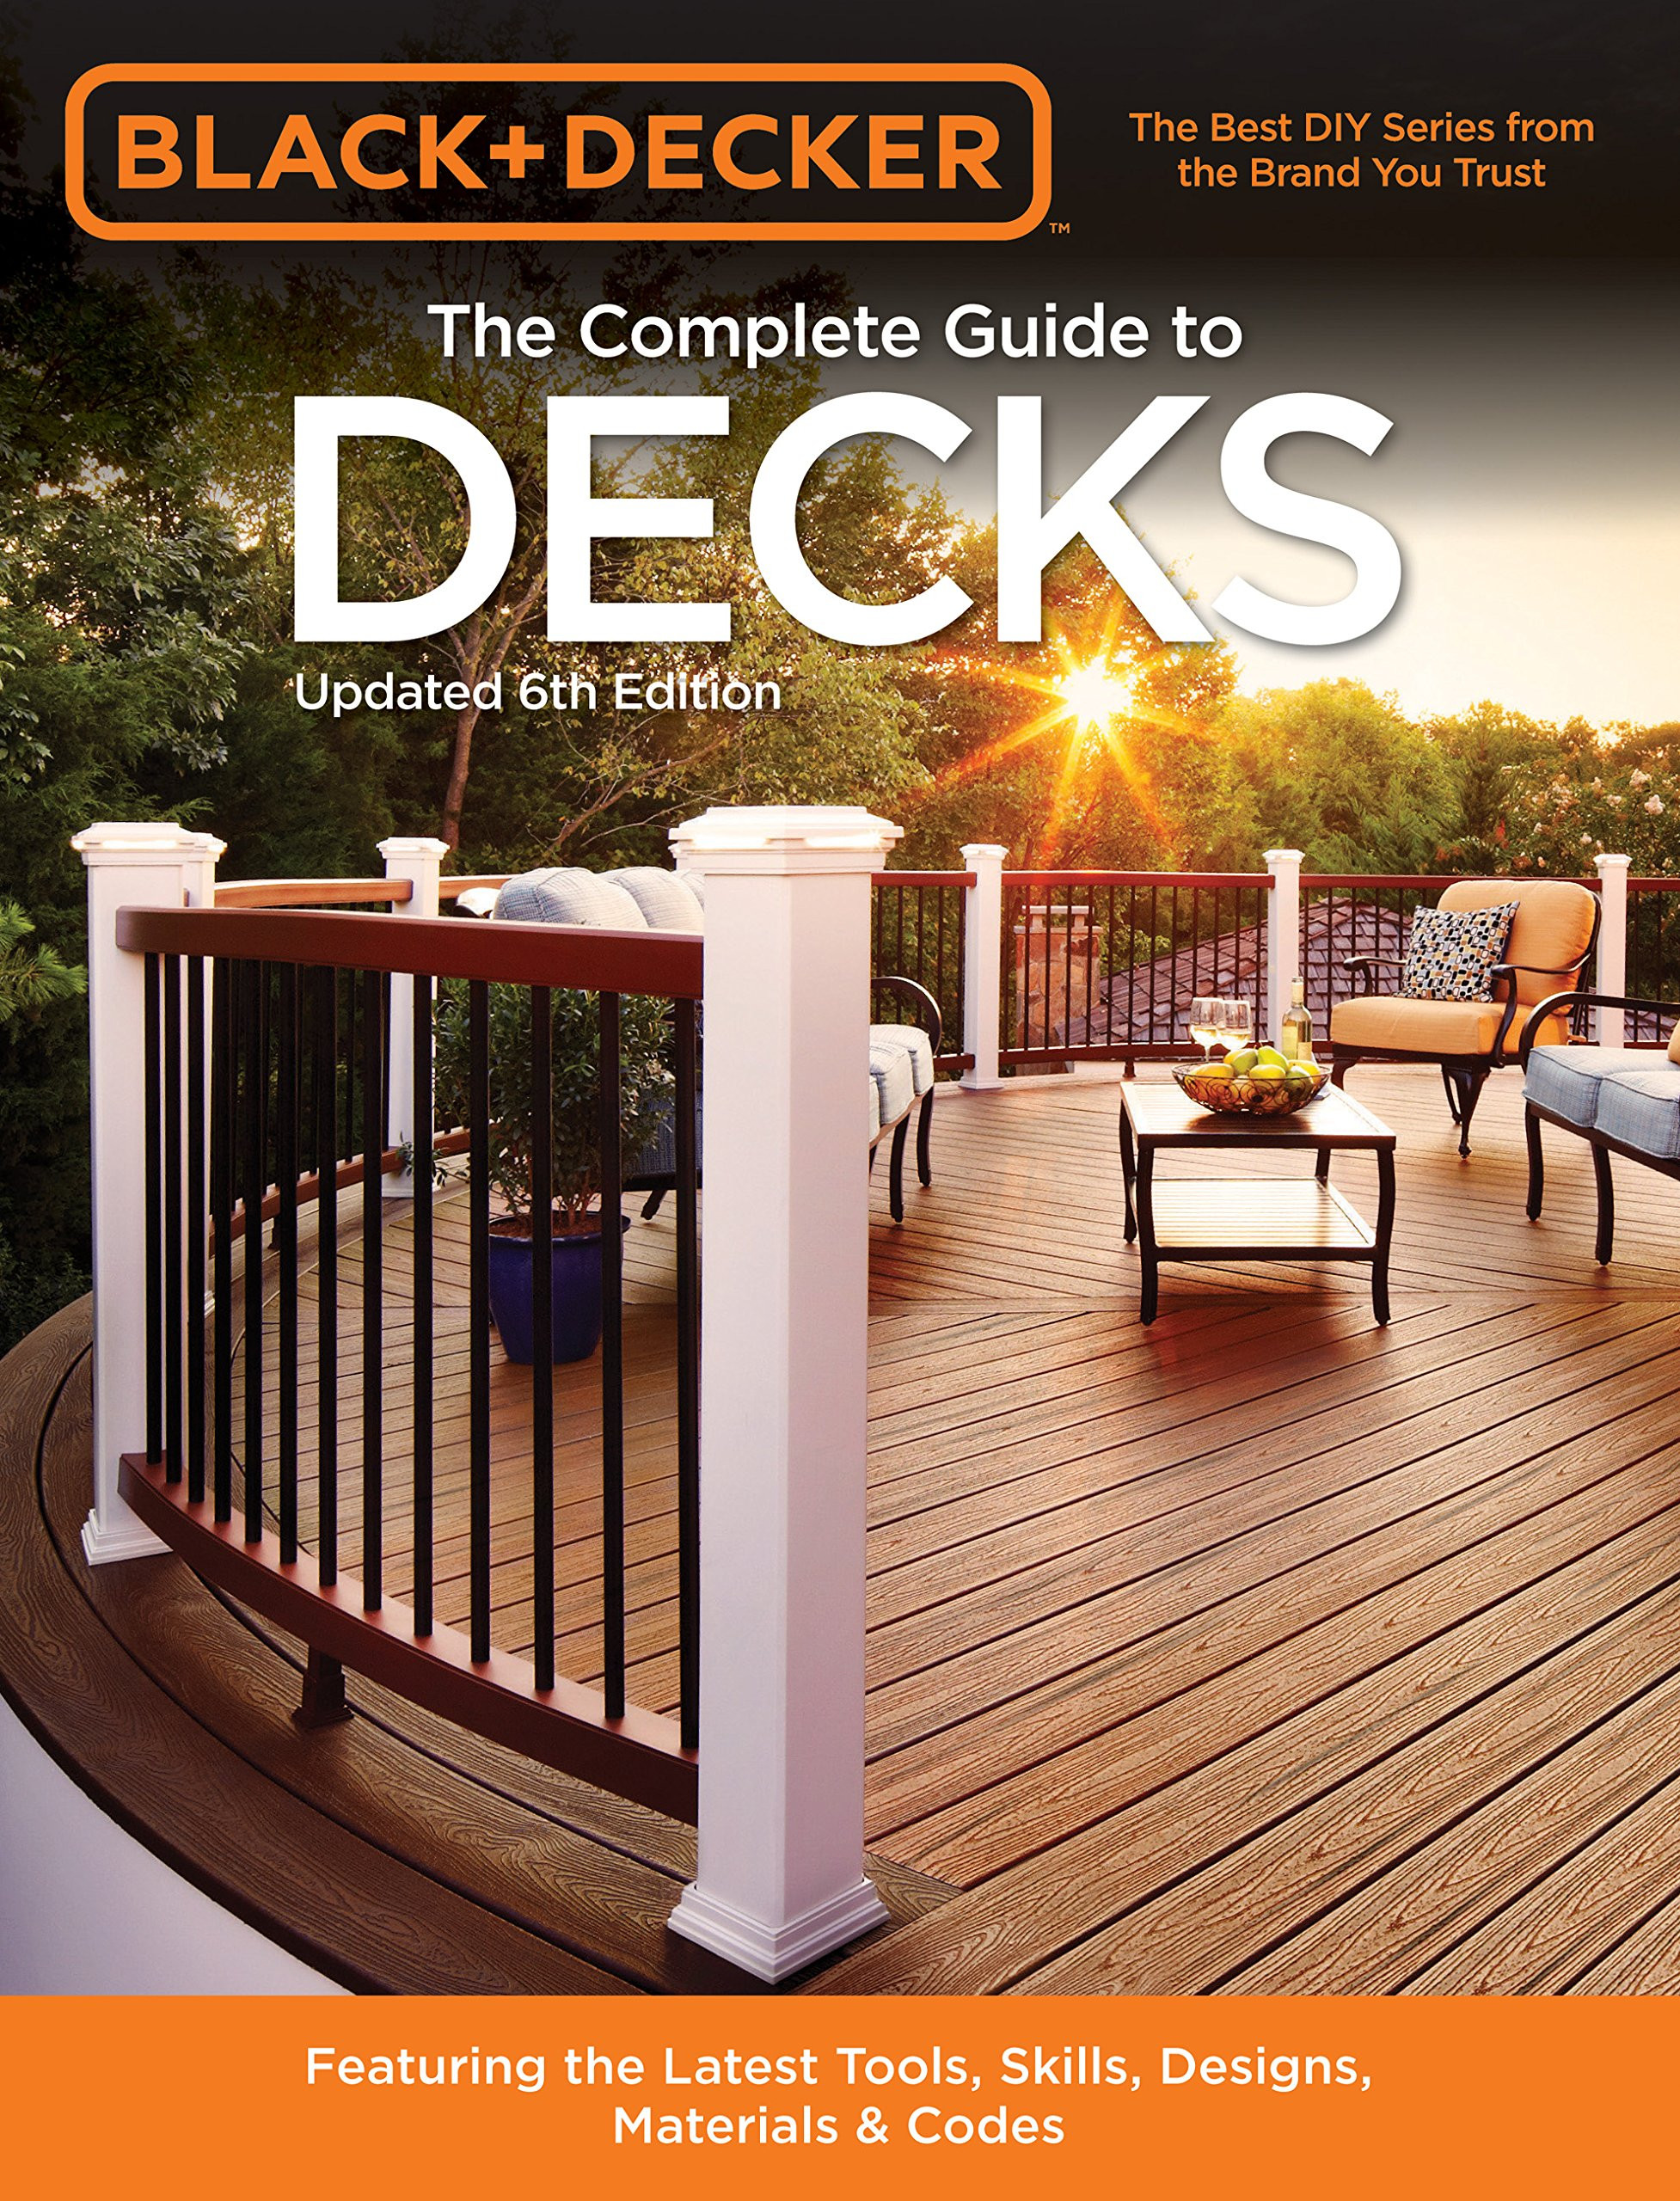 14 Stylish total Hardwood Flooring Oakville 2024 free download total hardwood flooring oakville of black decker the complete guide to decks 6th edition featuring pertaining to black decker the complete guide to decks 6th edition featuring the latest too